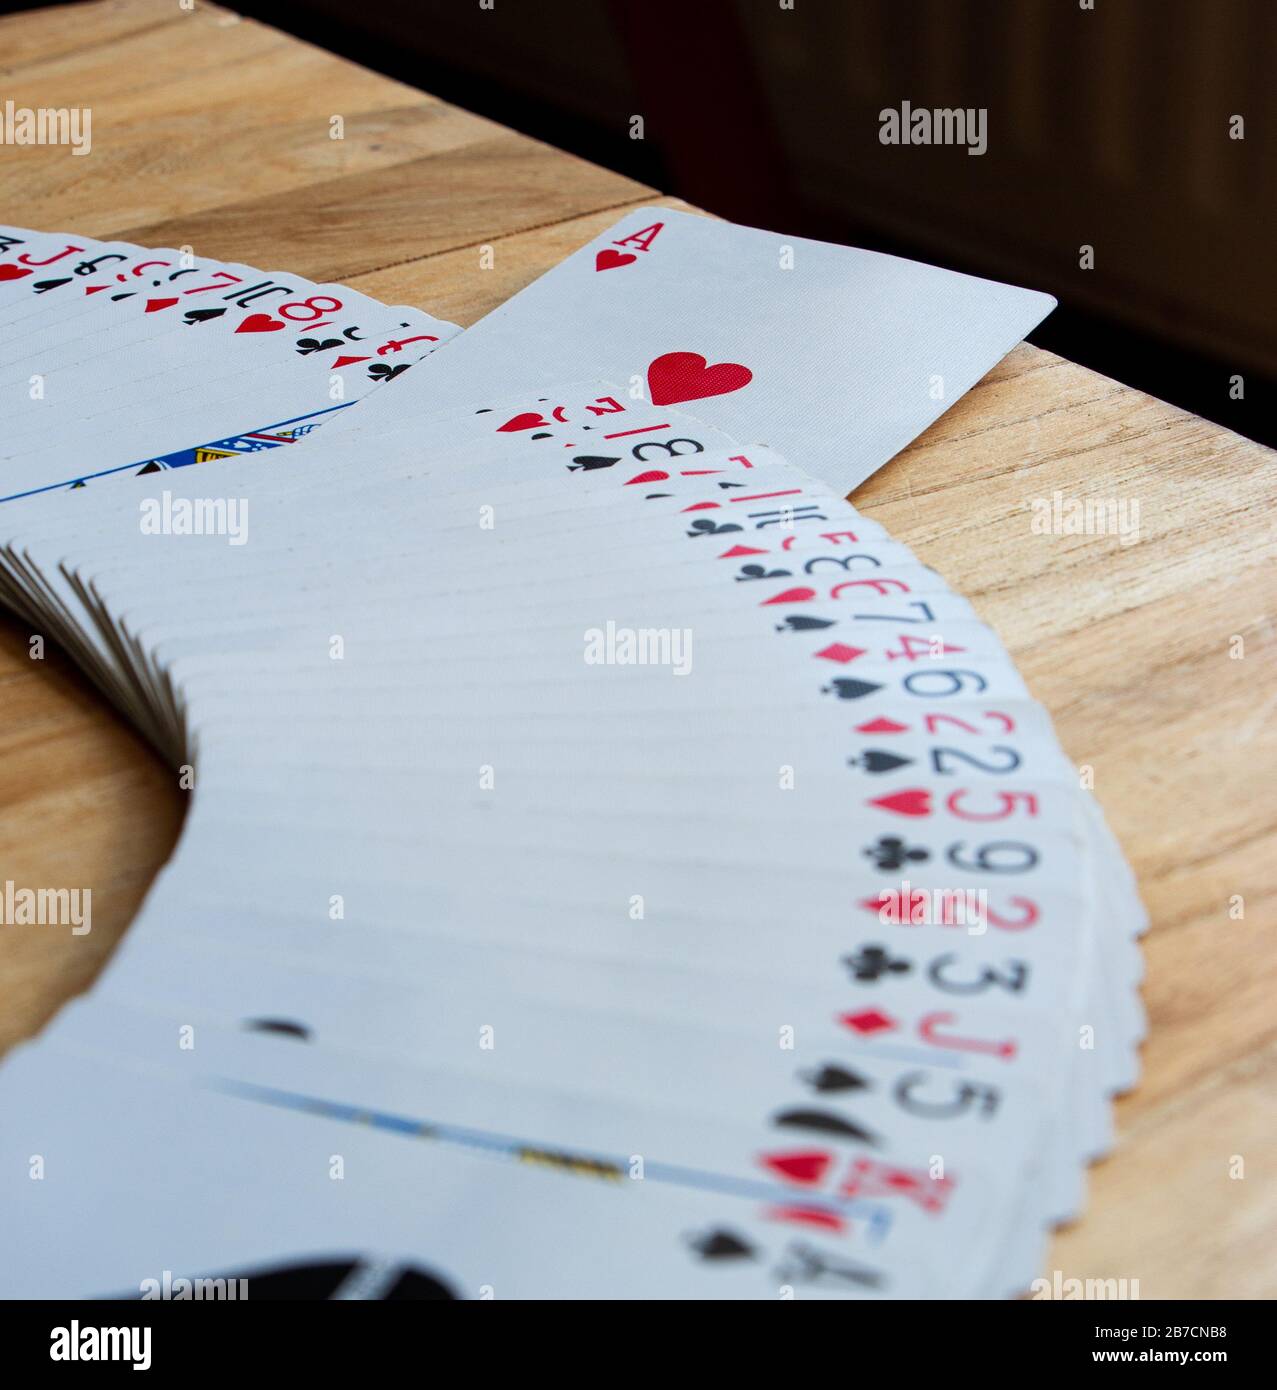 Spread of playing cards with the ace of hearts standing out, wooden surface, depth Stock Photo